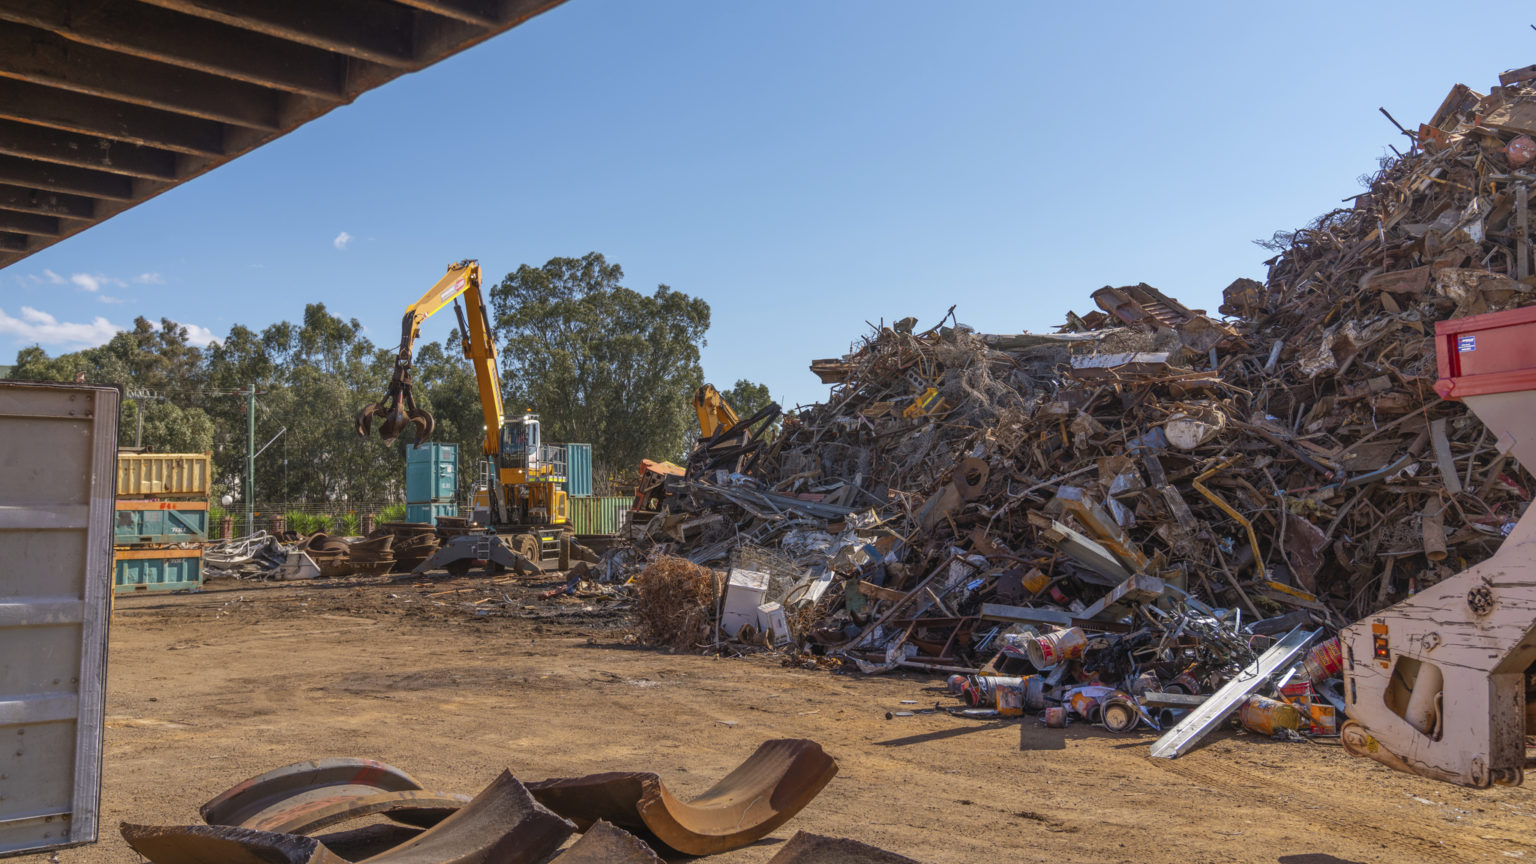 What’s In Store For The Scrap Metal Recycling Industry?